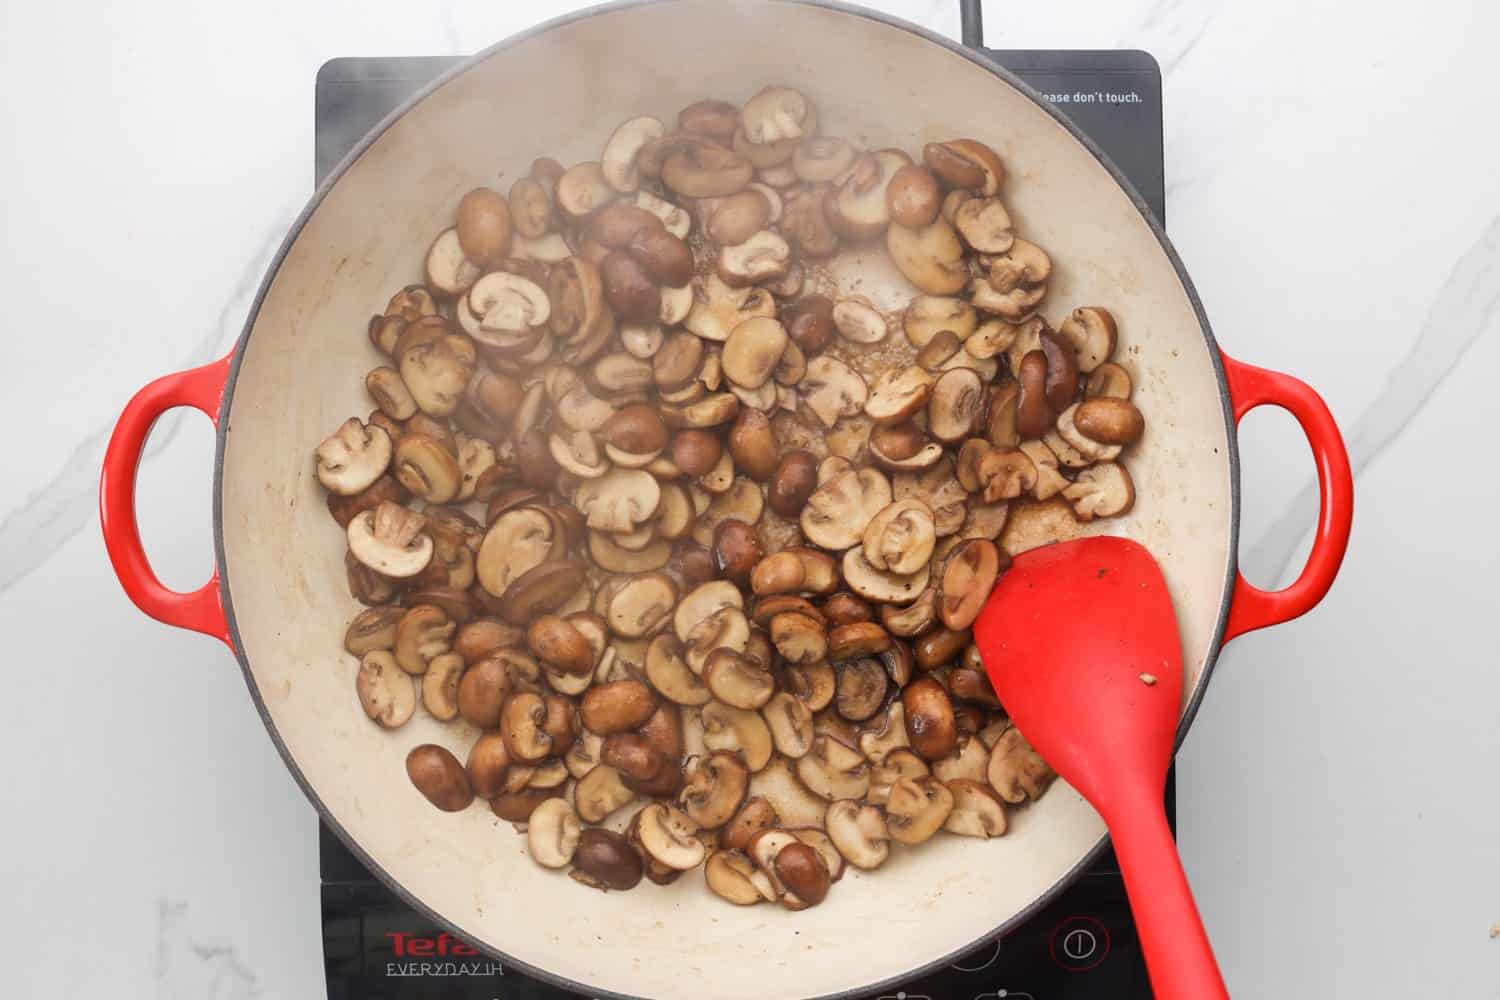 Mushrooms being cooked in a skillet, and a red spatula